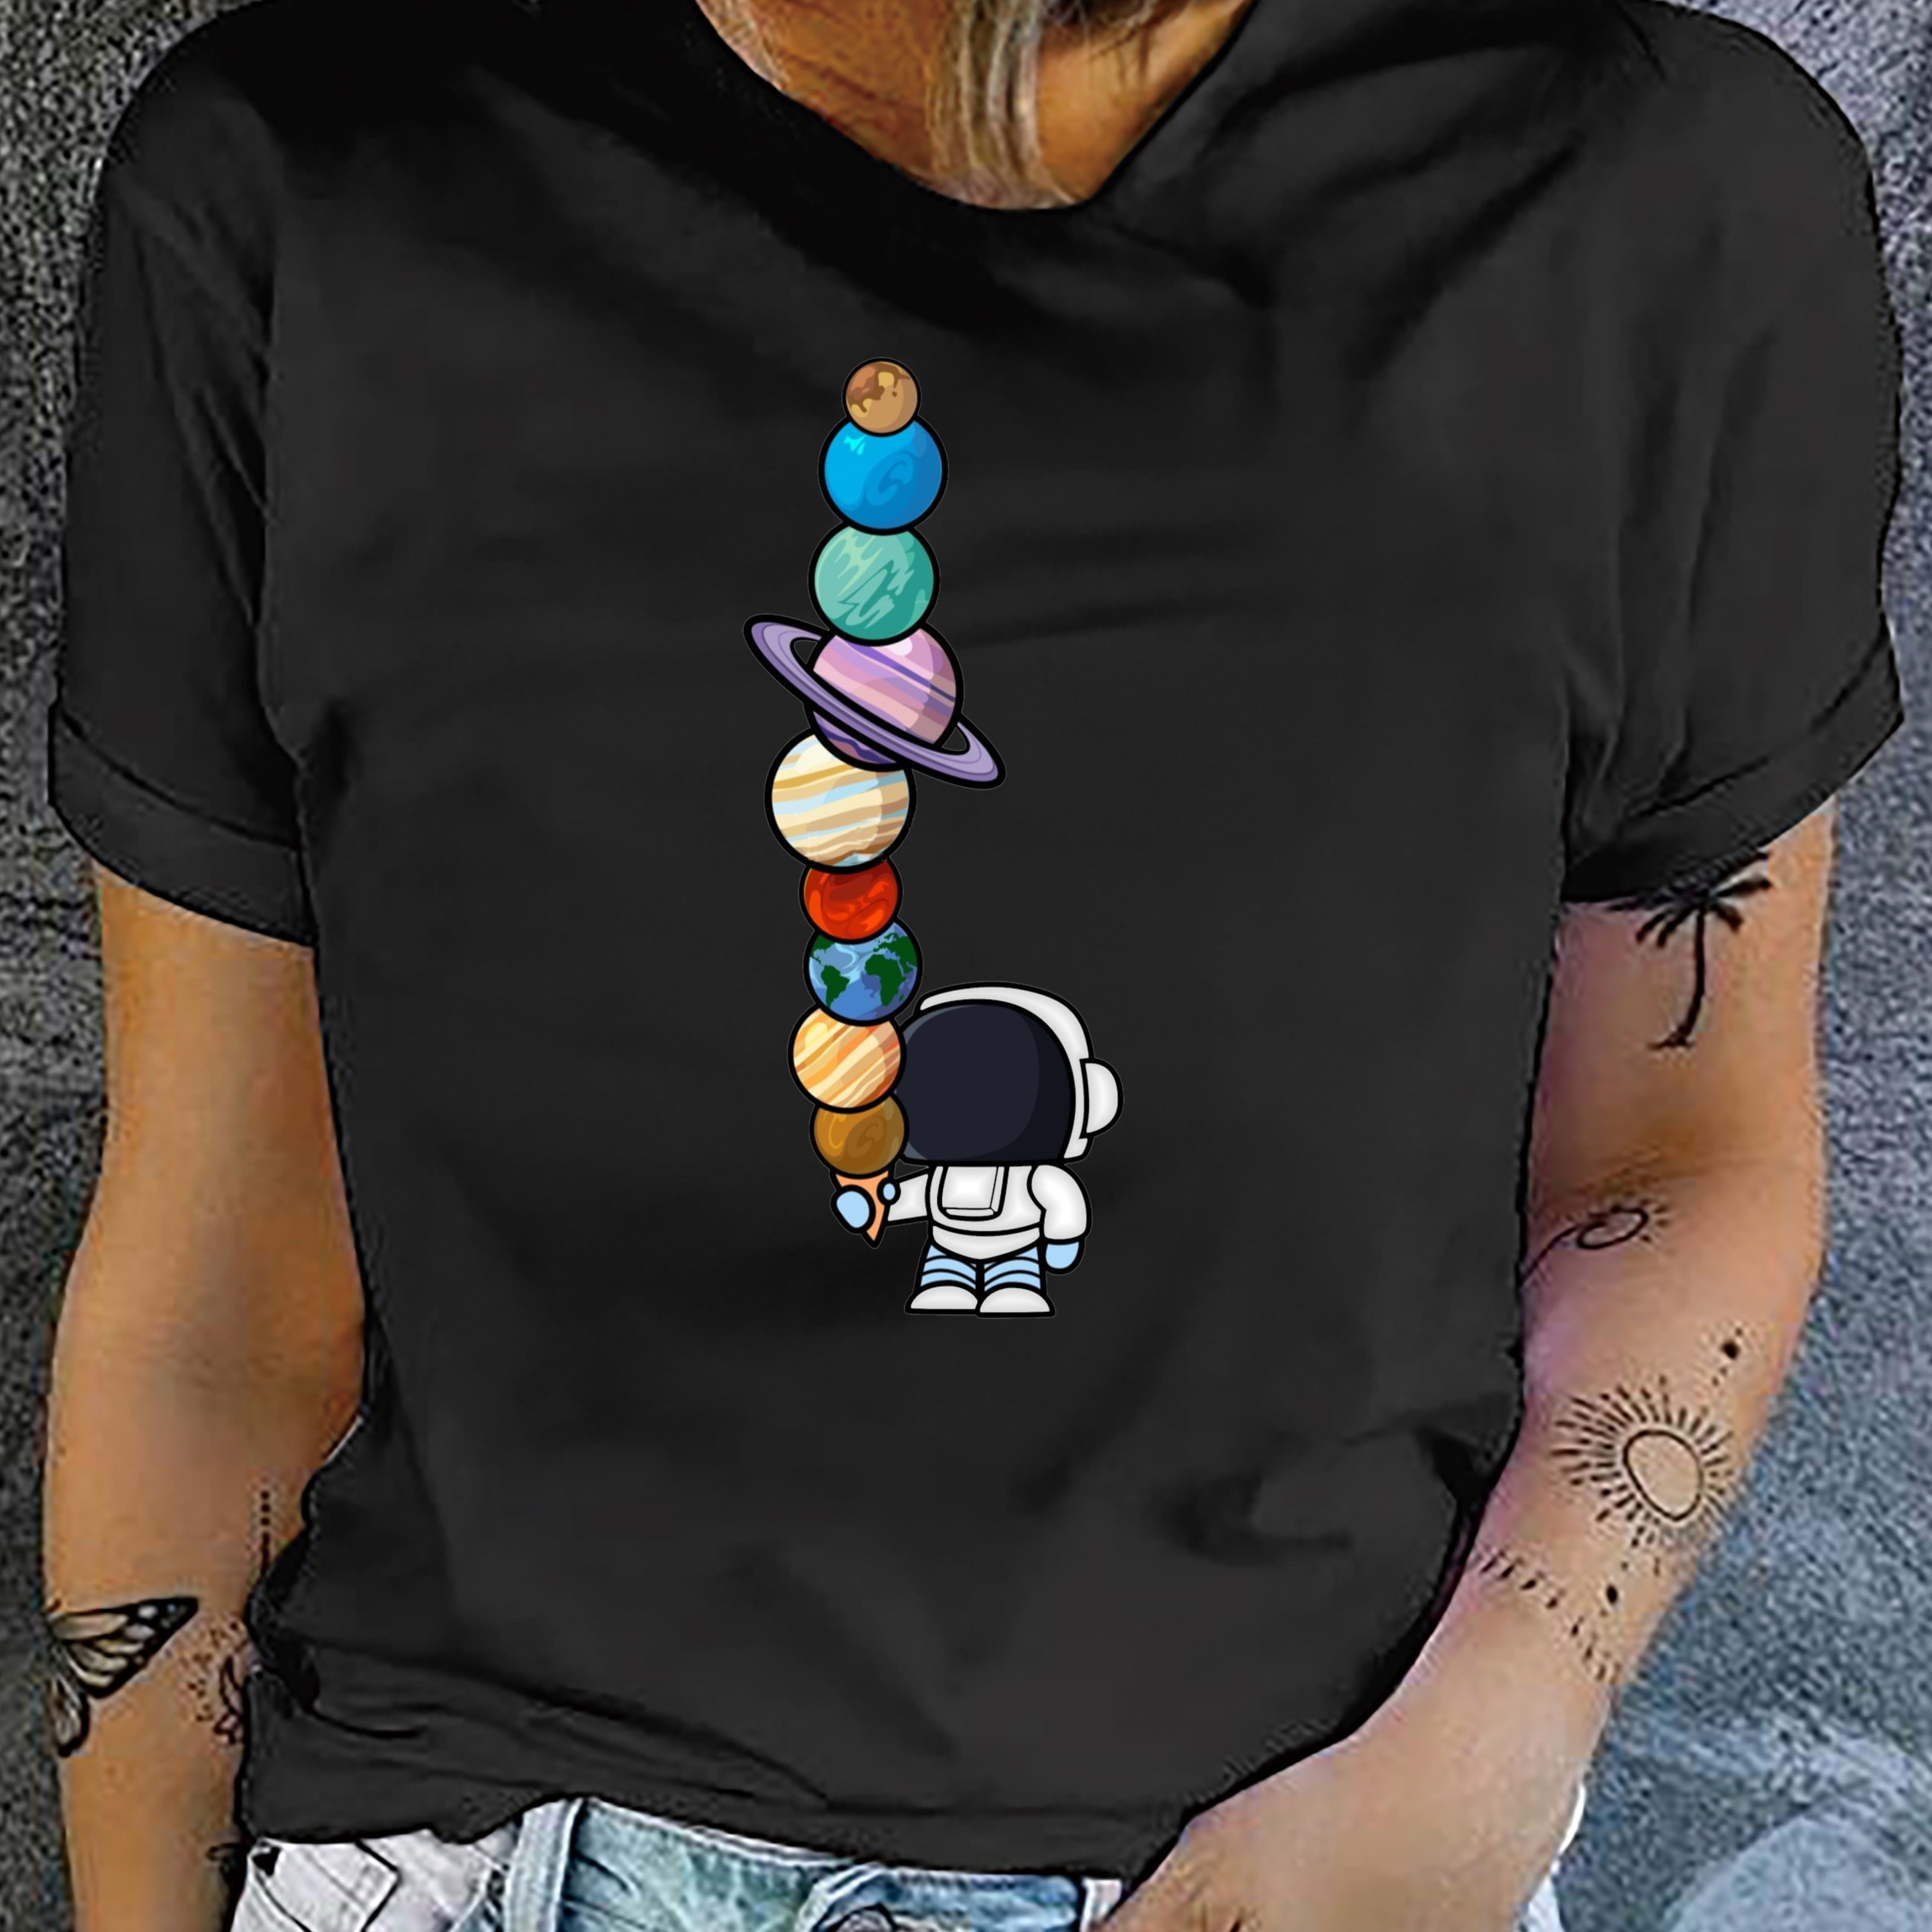 

Astronaut & Planets Print T-shirt, Short Sleeve Crew Neck Casual Top For Summer & Spring, Women's Clothing